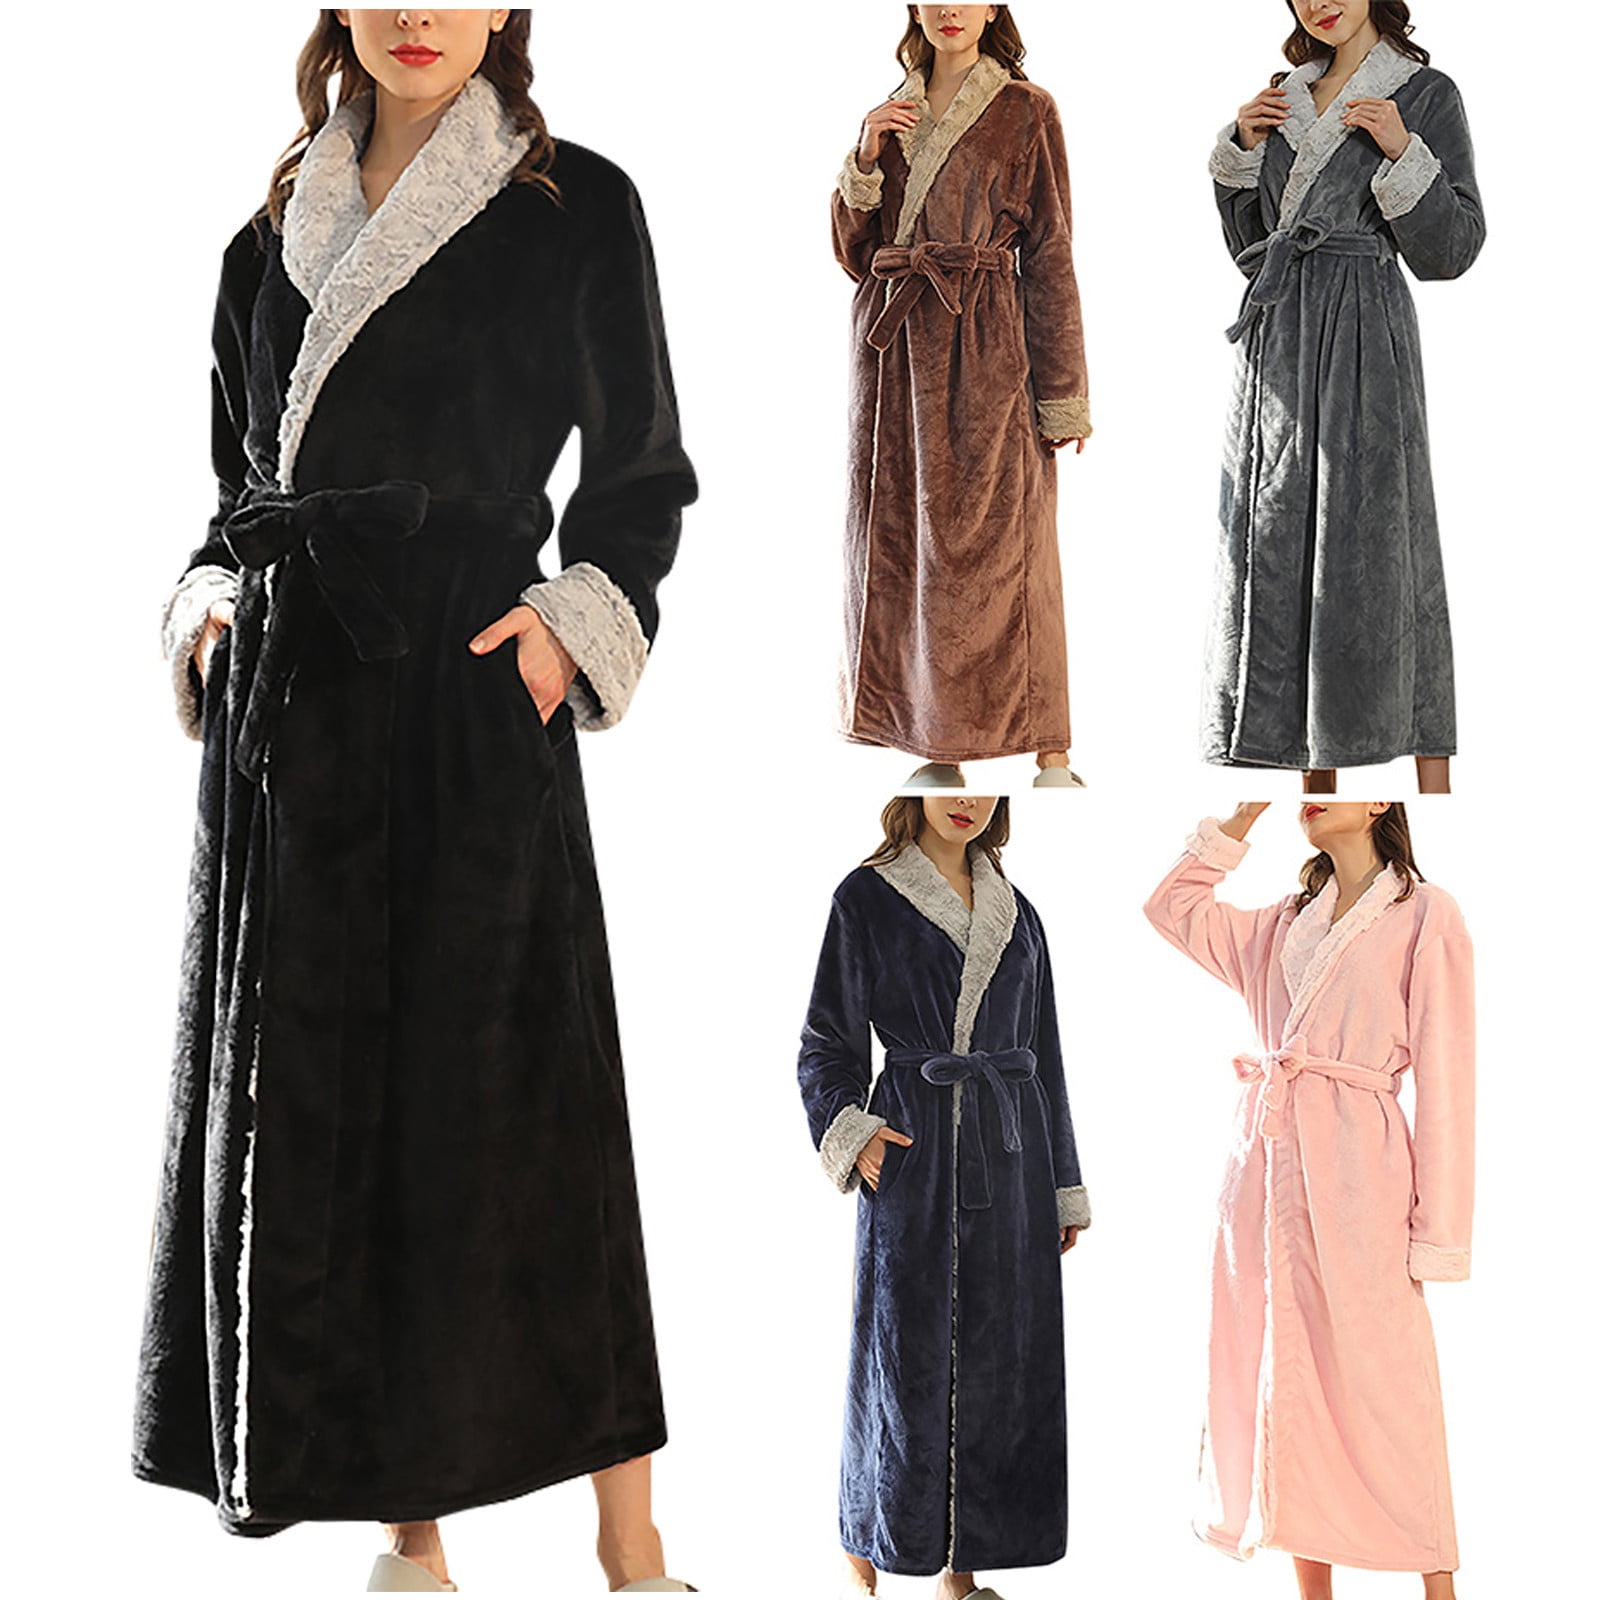 A Robe for Every Occasion: How to Buy and Wear Robes